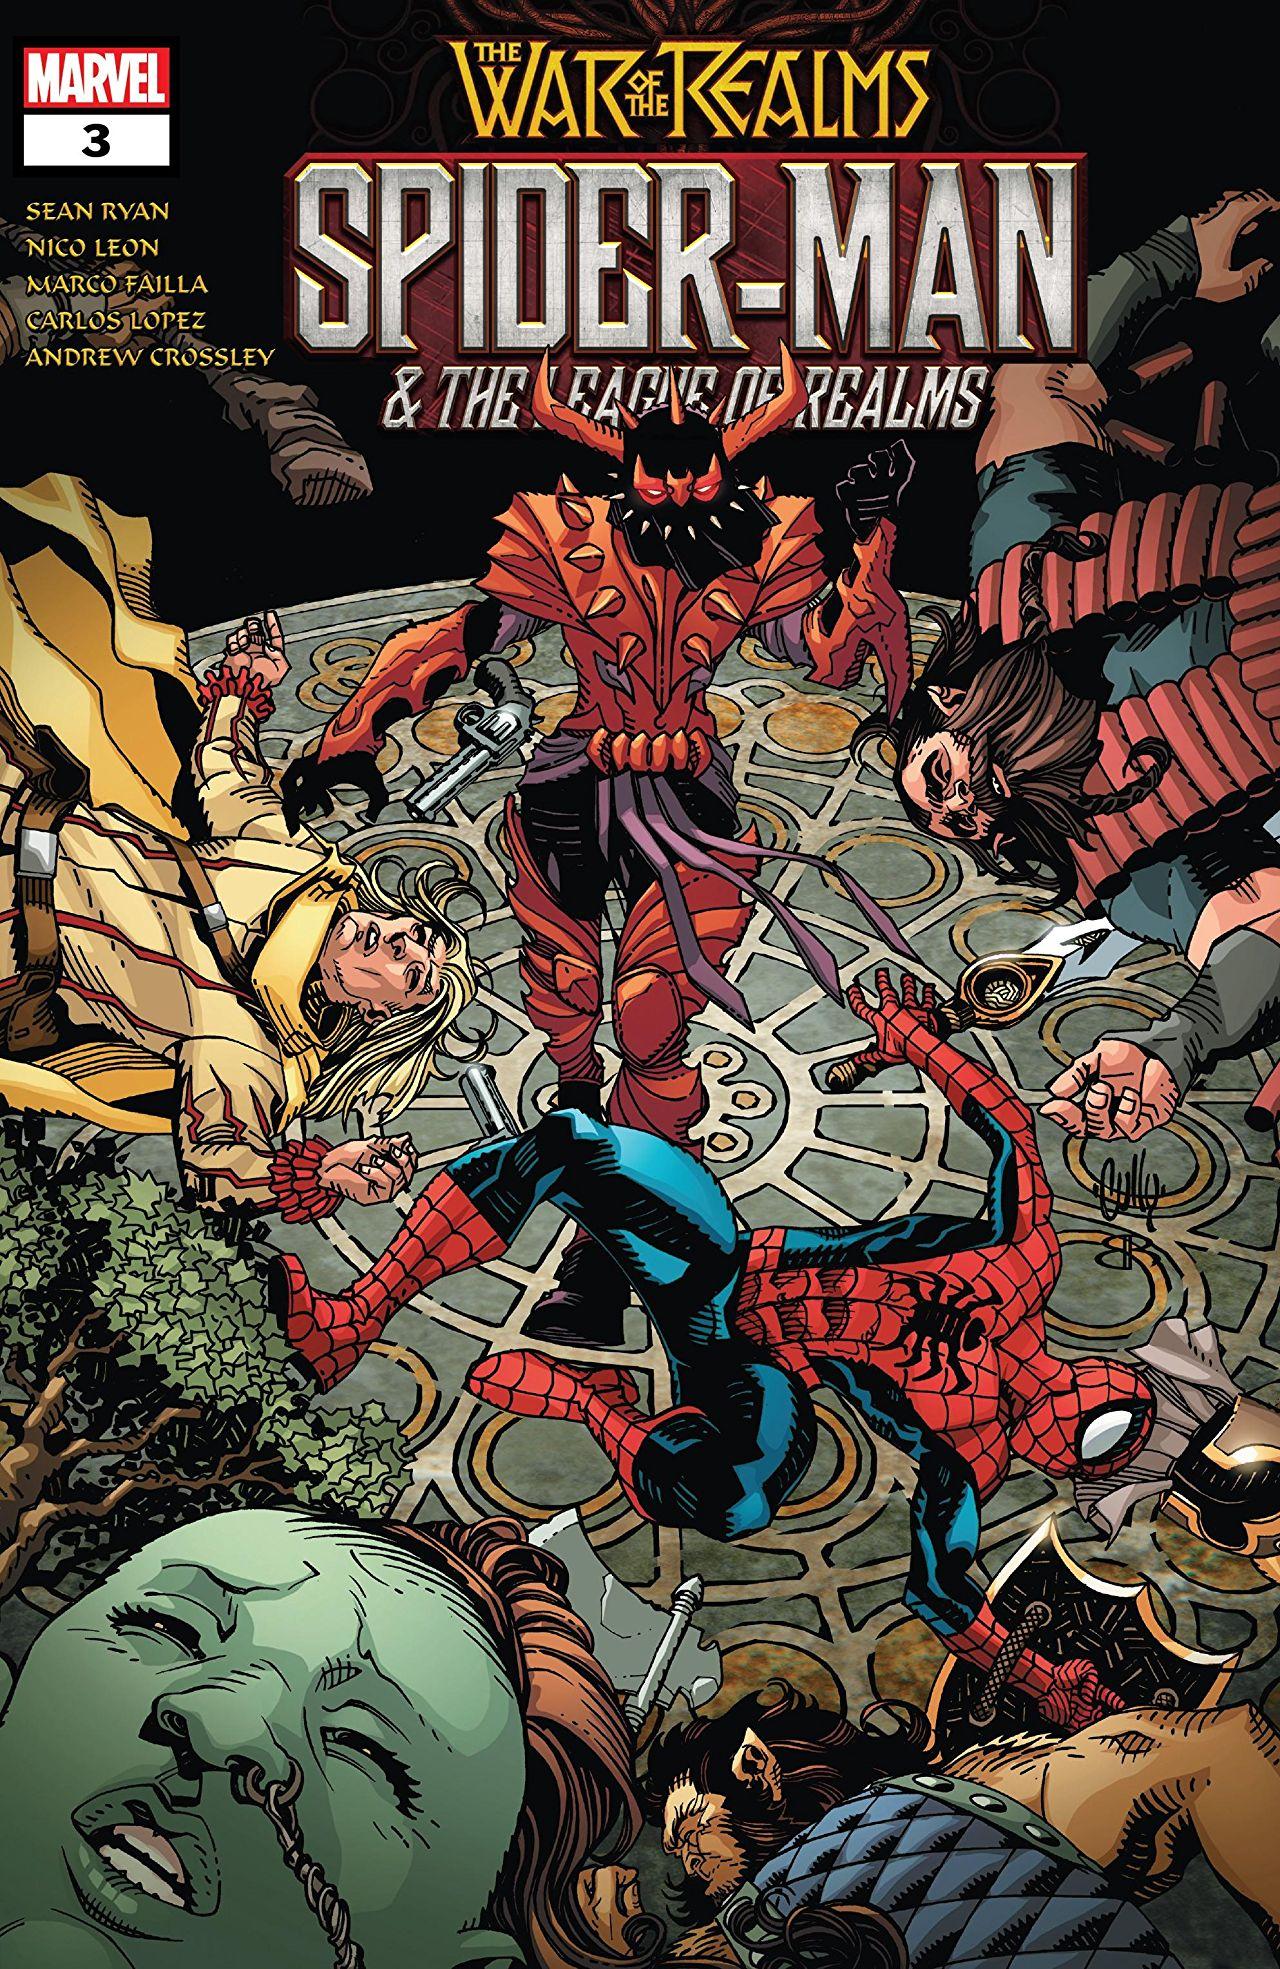 War of the Realms: Spider-Man & the League of Realms Vol. 1 #3